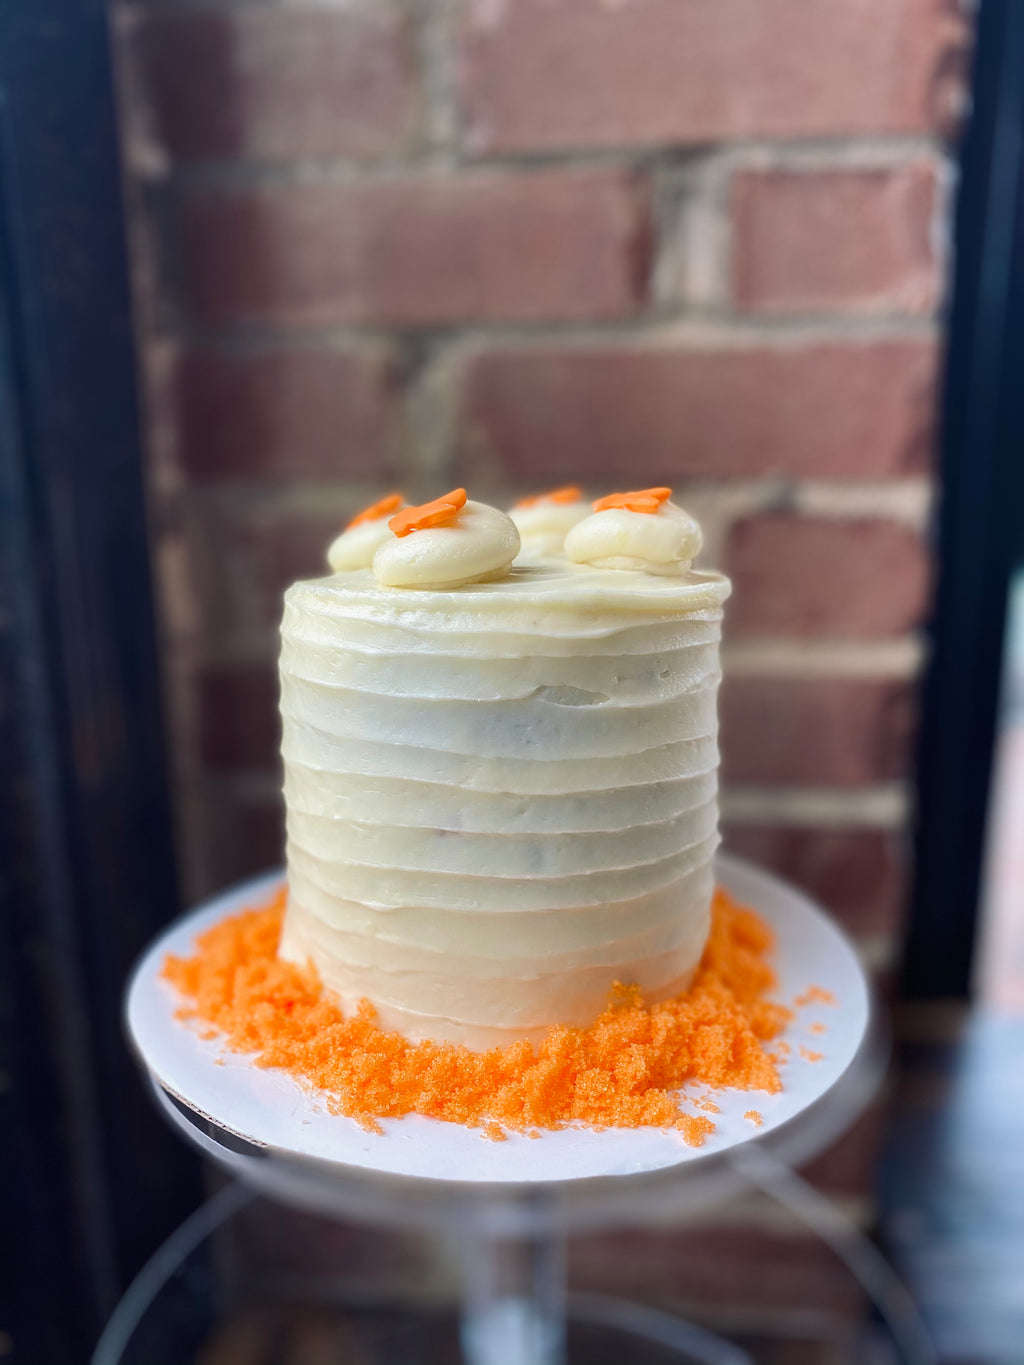 Carrot Cake with Cream Cheese Frosting.